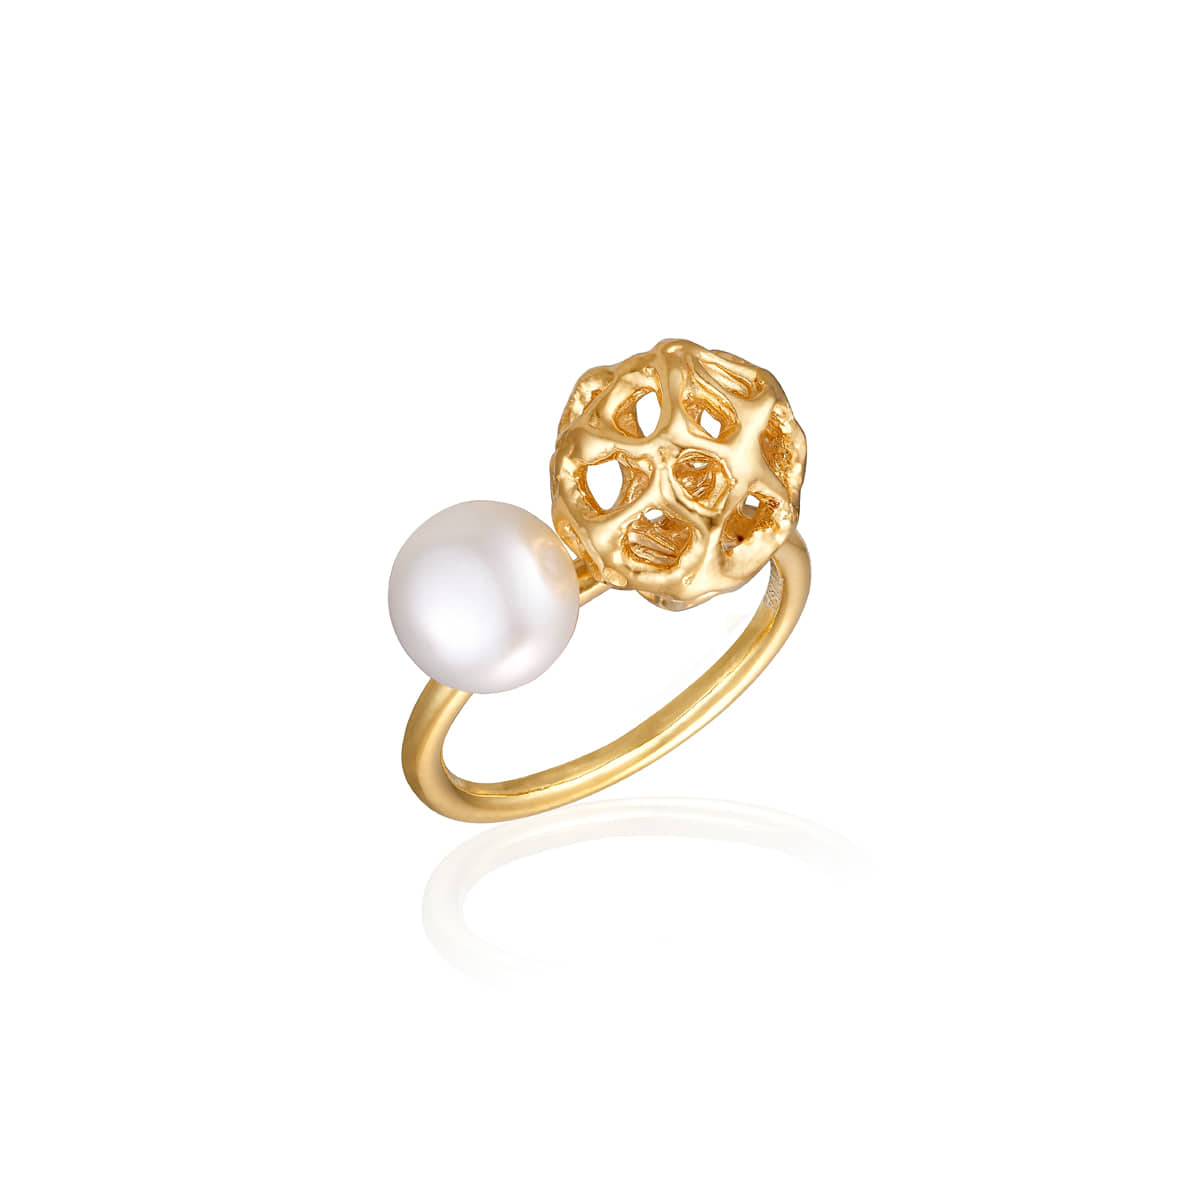 Snowpearl ring